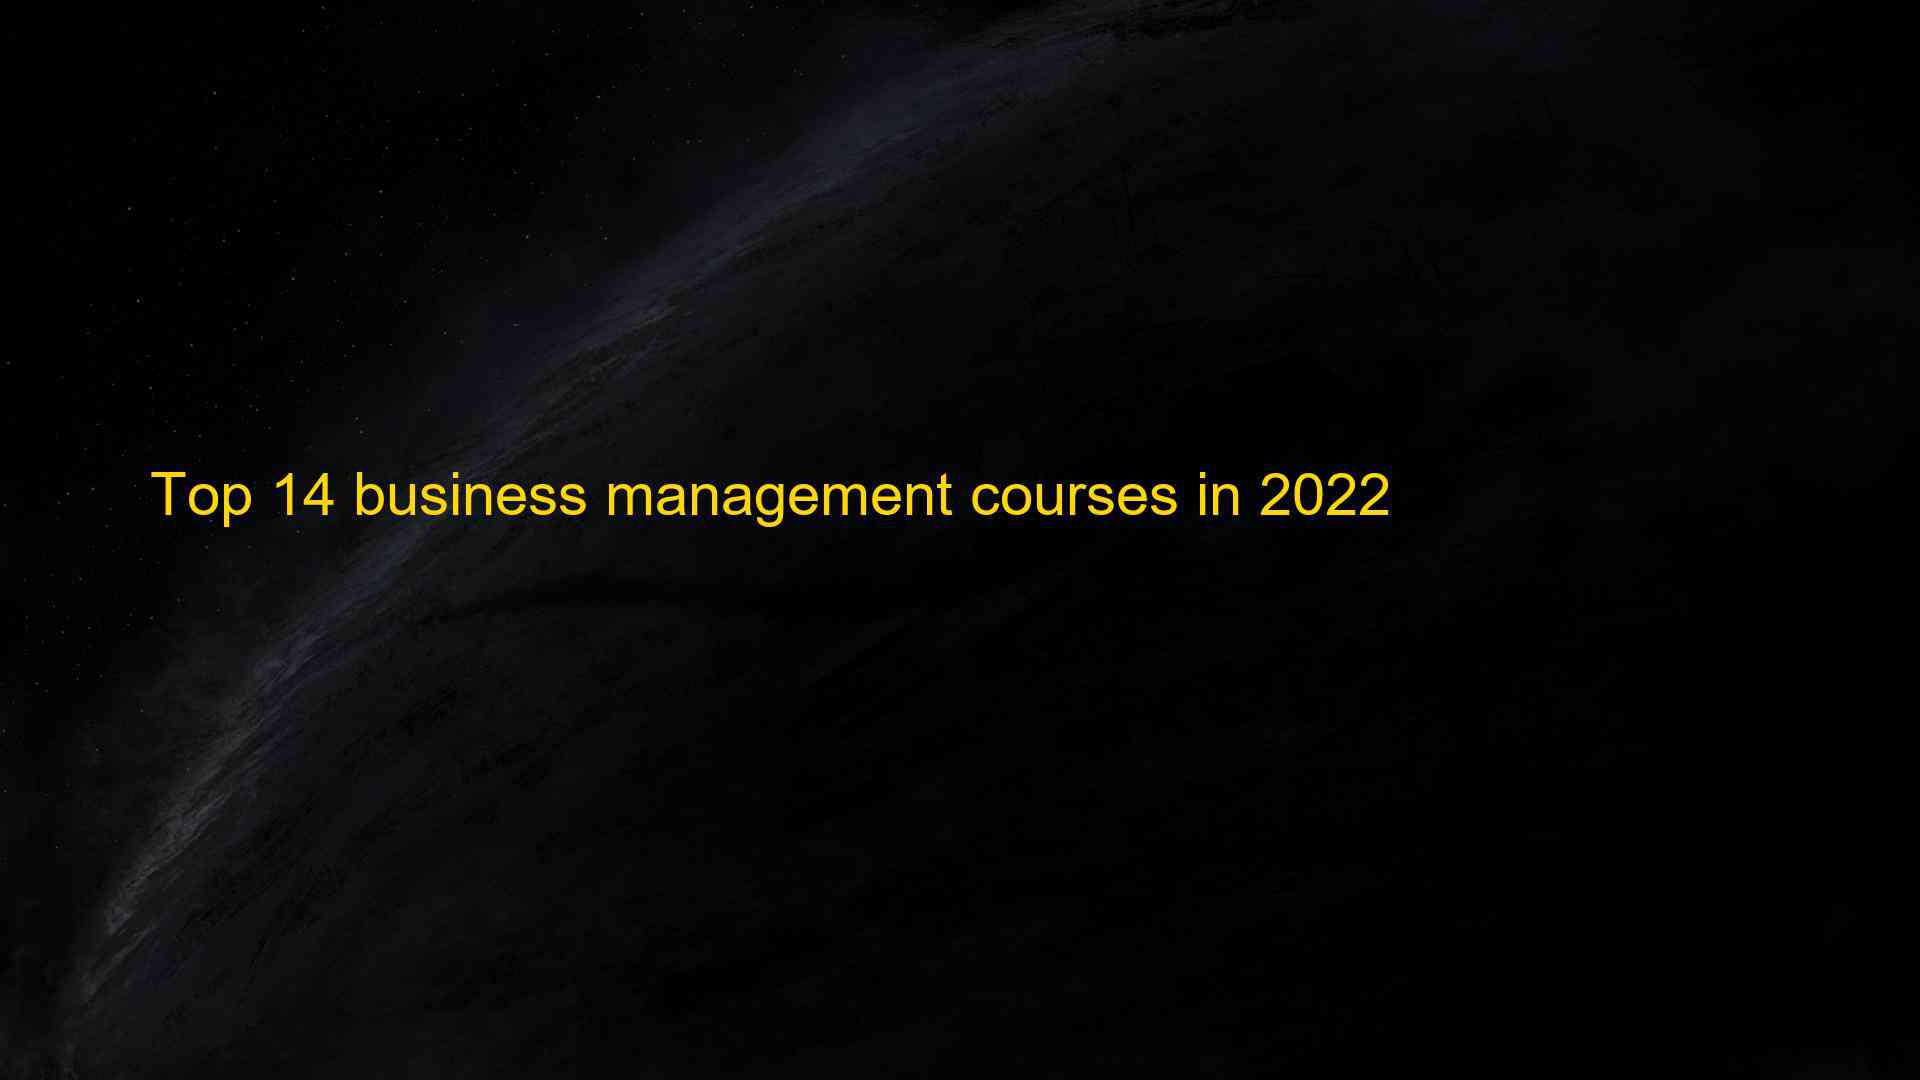 Top 14 business management courses in 2022 1660820328